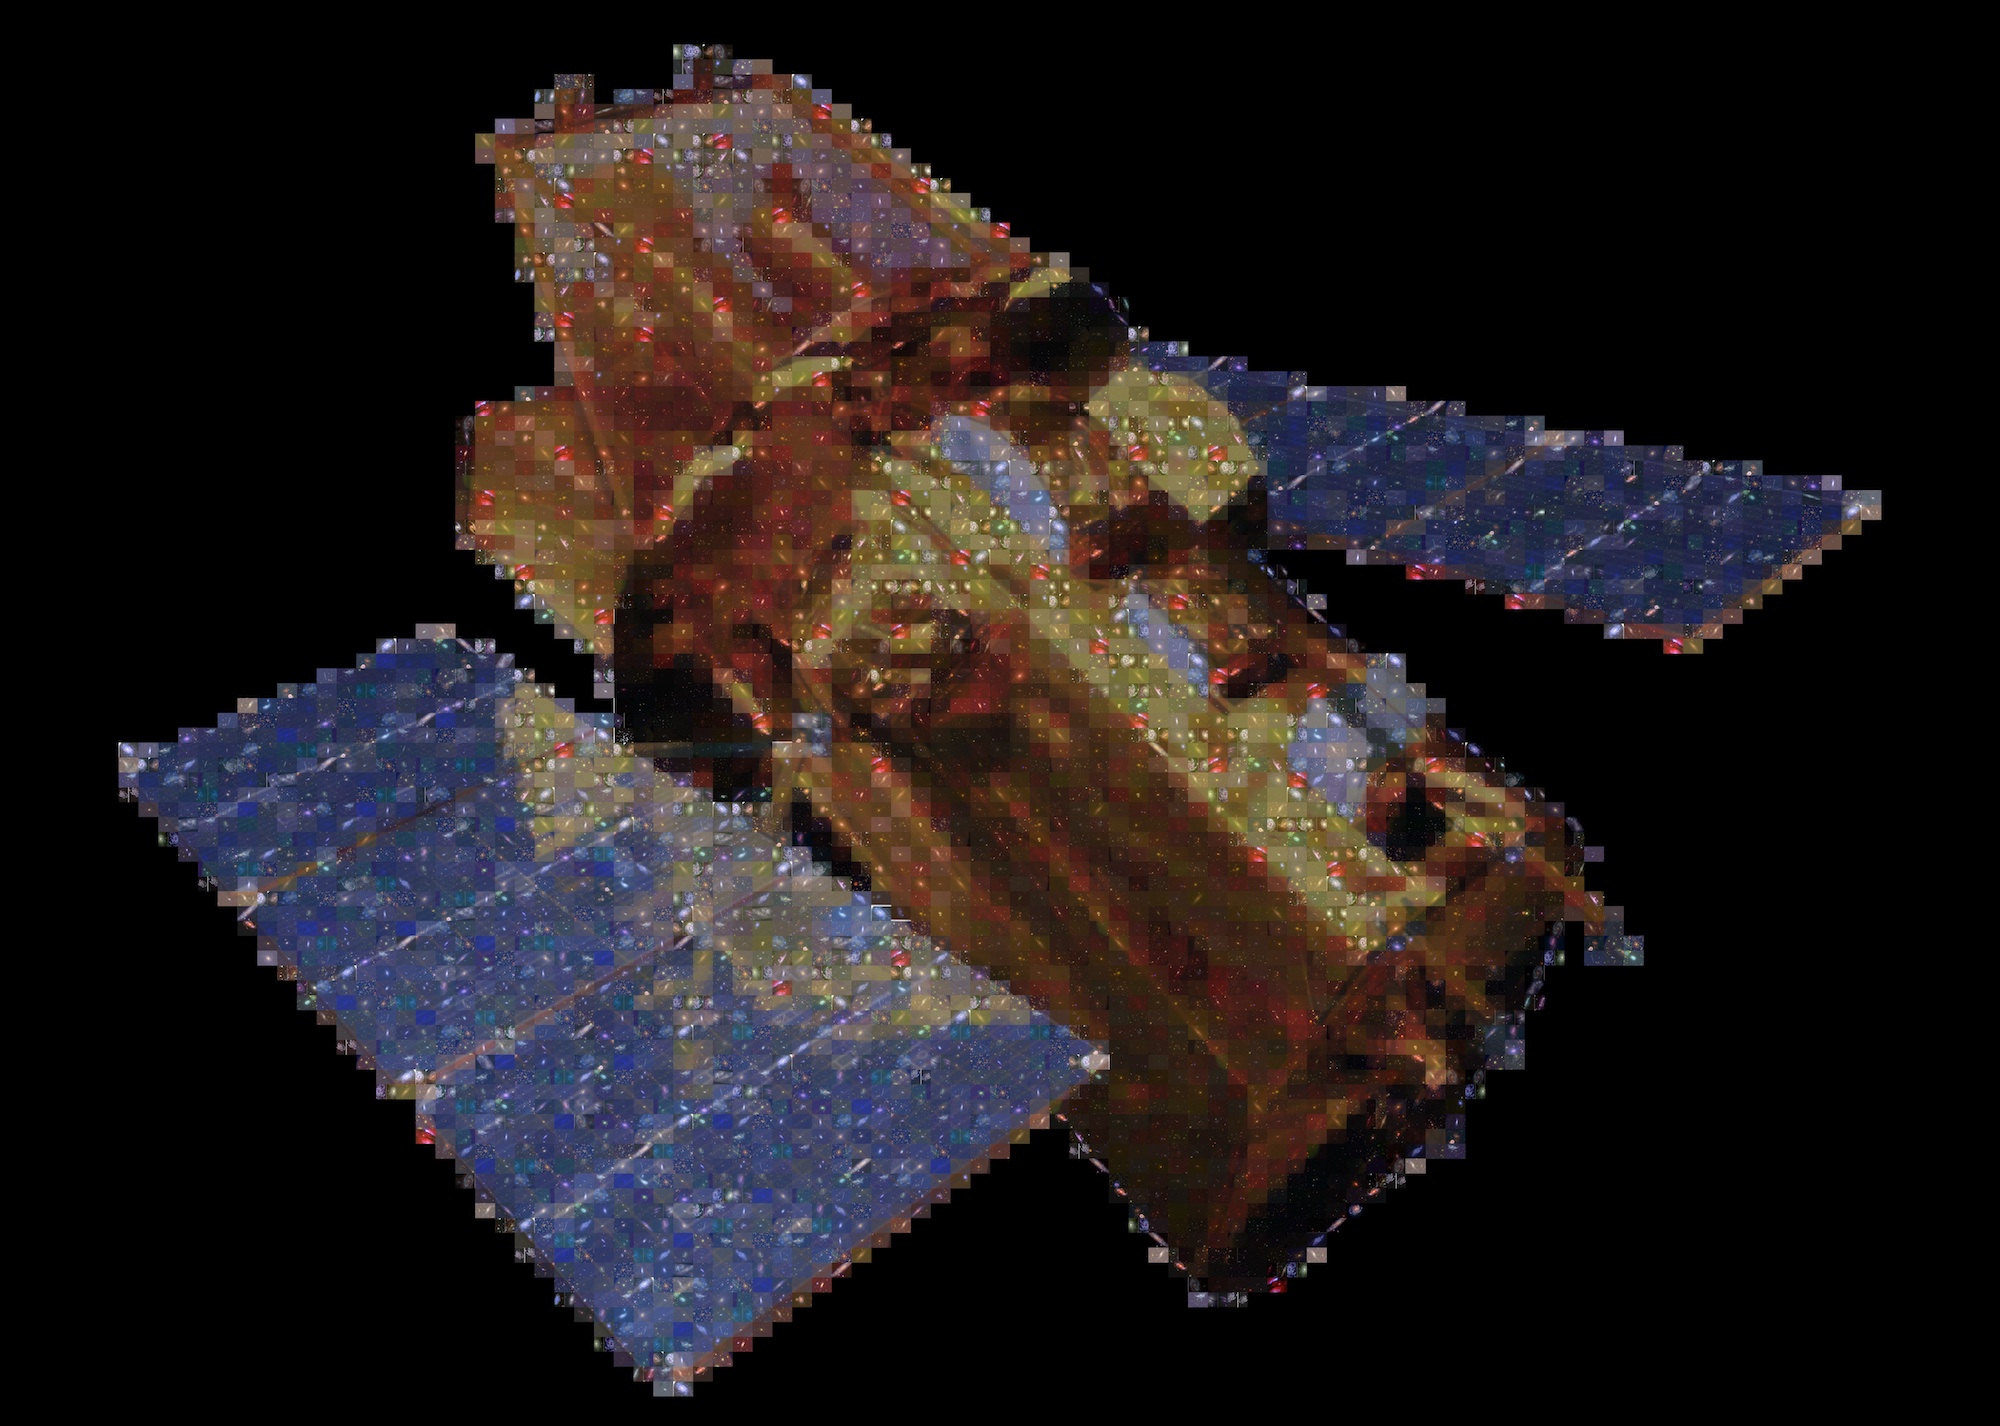 This mosaic of the Neil Gehrels Swift Observatory is created from images of astronomical objects captured by the satellite’s Ultraviolet/Optical Telescope which recently captured its millionth image. Each tile is 52 x 39 pixels, and at maximum resolution, the entire mosaic is 5,252 x 3,744 pixels. Zoom in to see each tile more clearly. Credit: NASA/Swift and AndreaMosaic